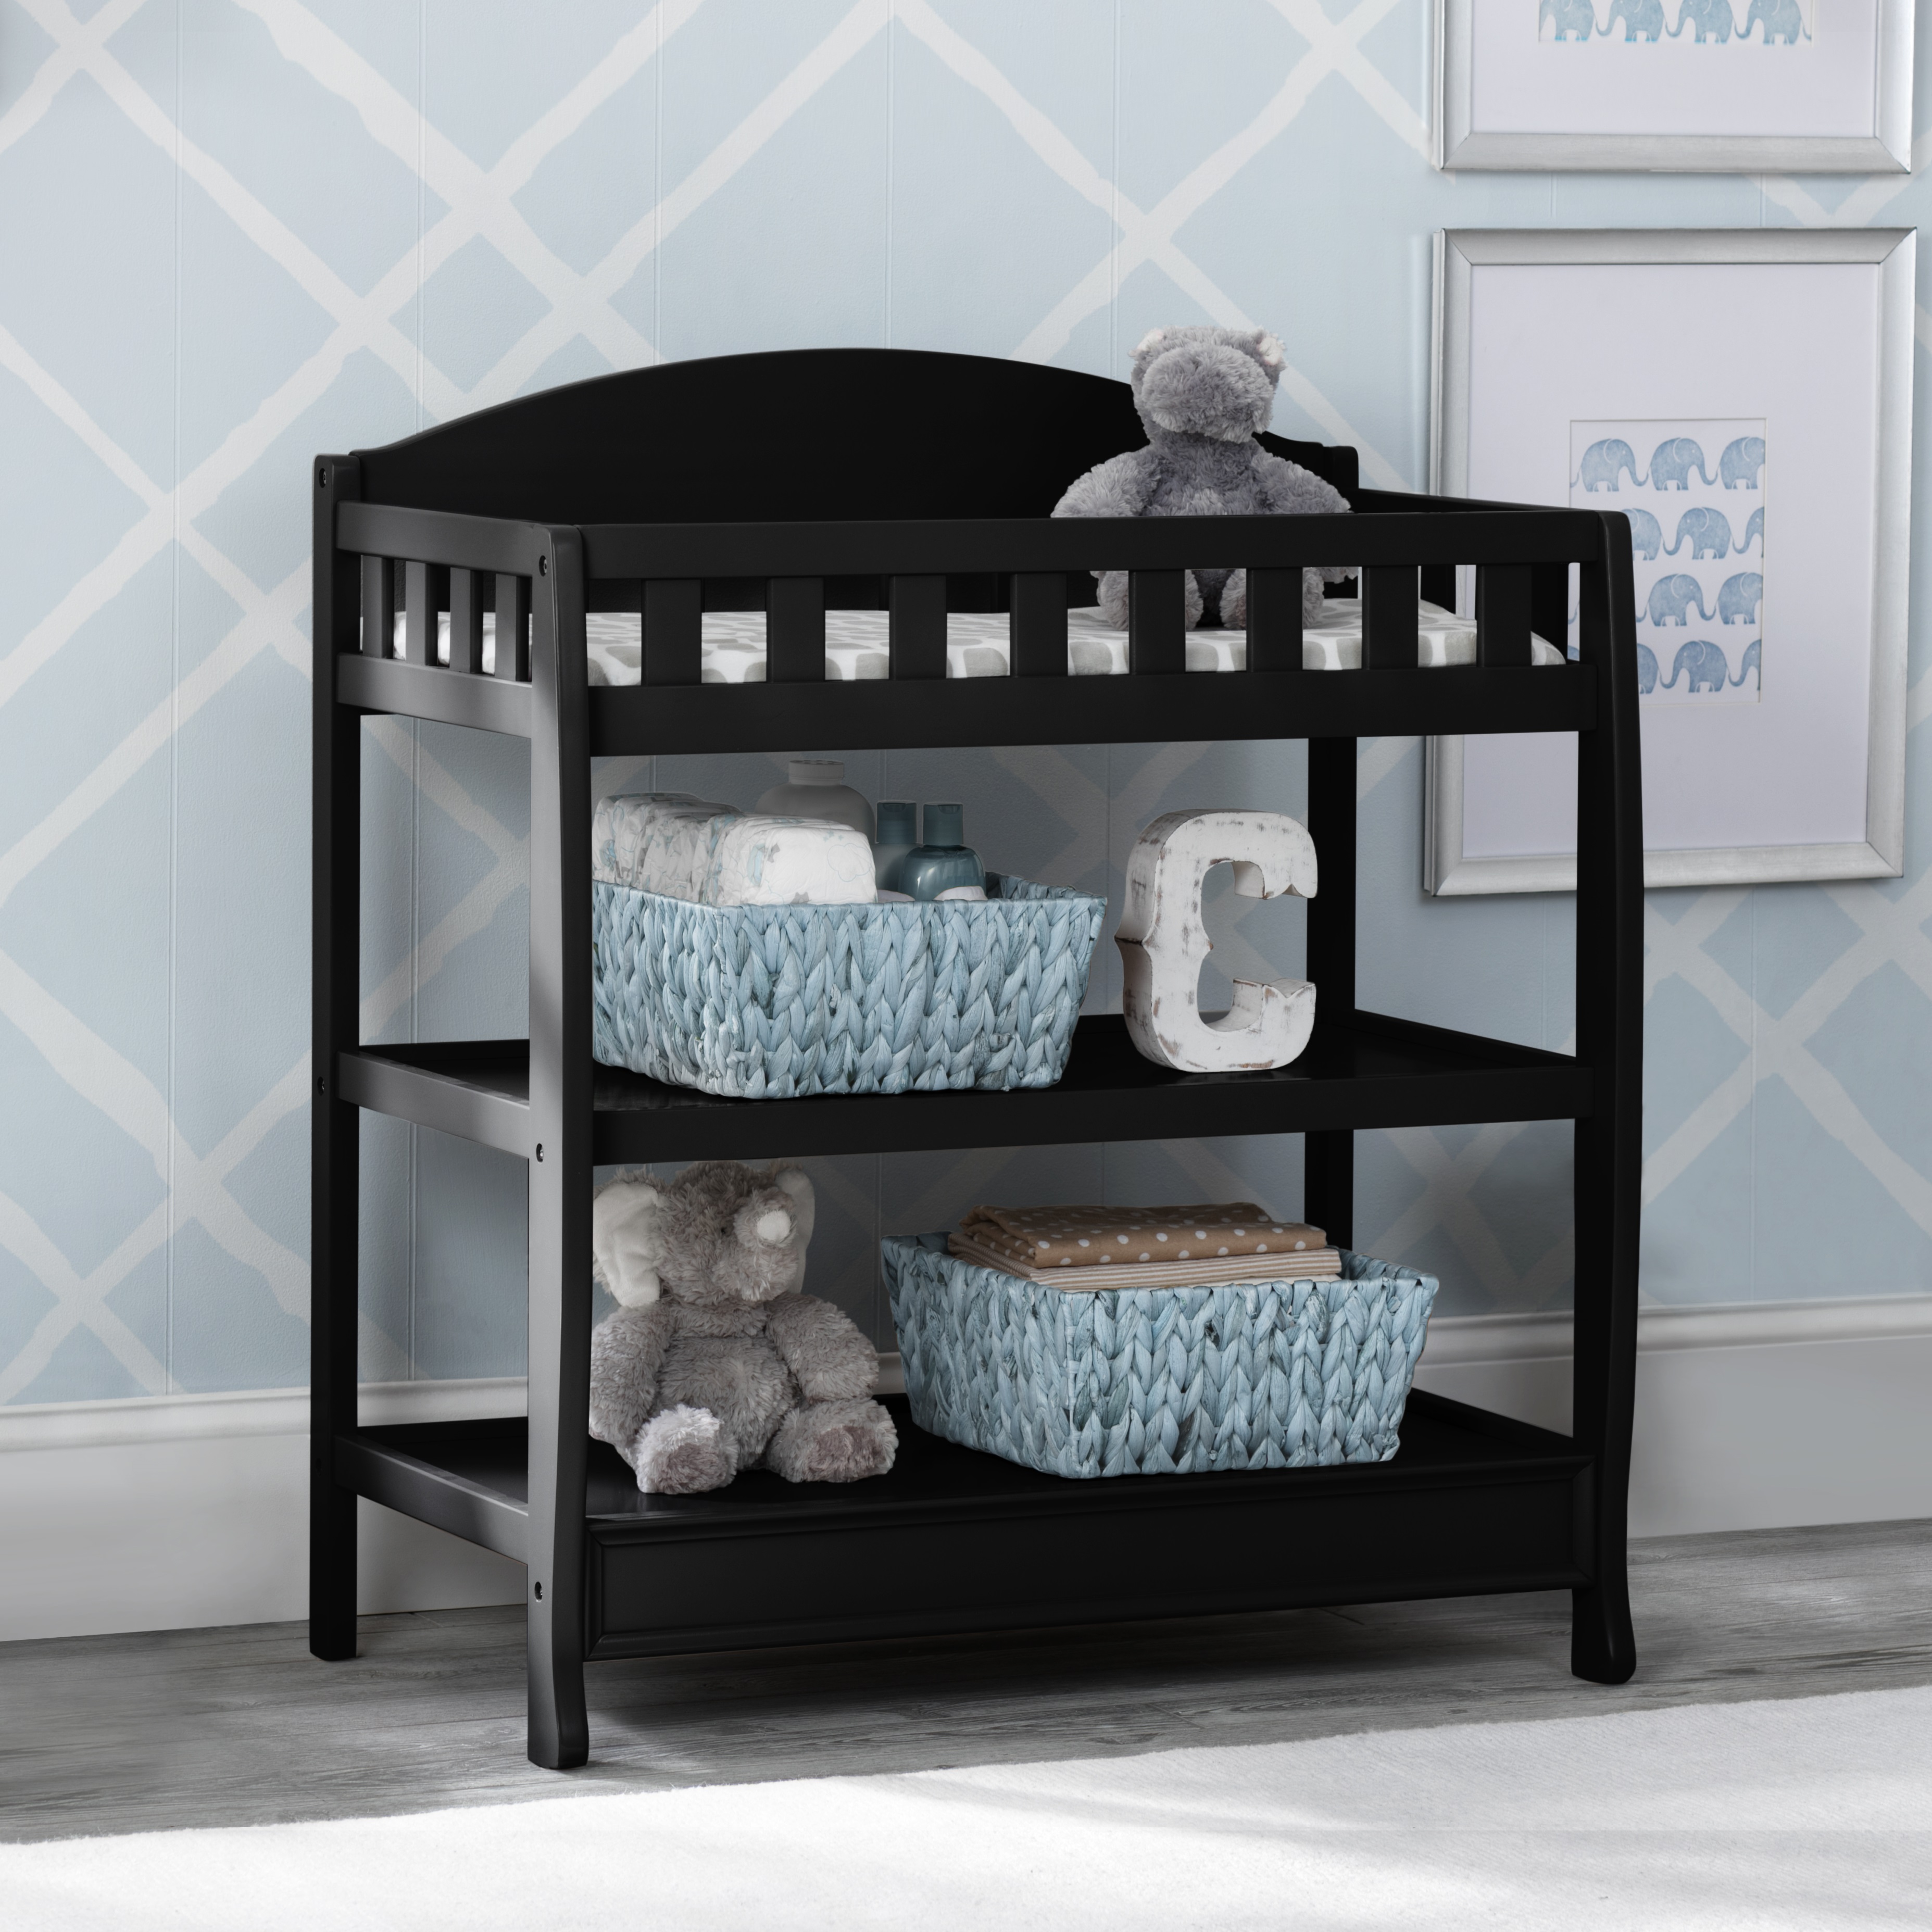 Delta Children Wilmington Changing Table with Pad, Black - image 3 of 6